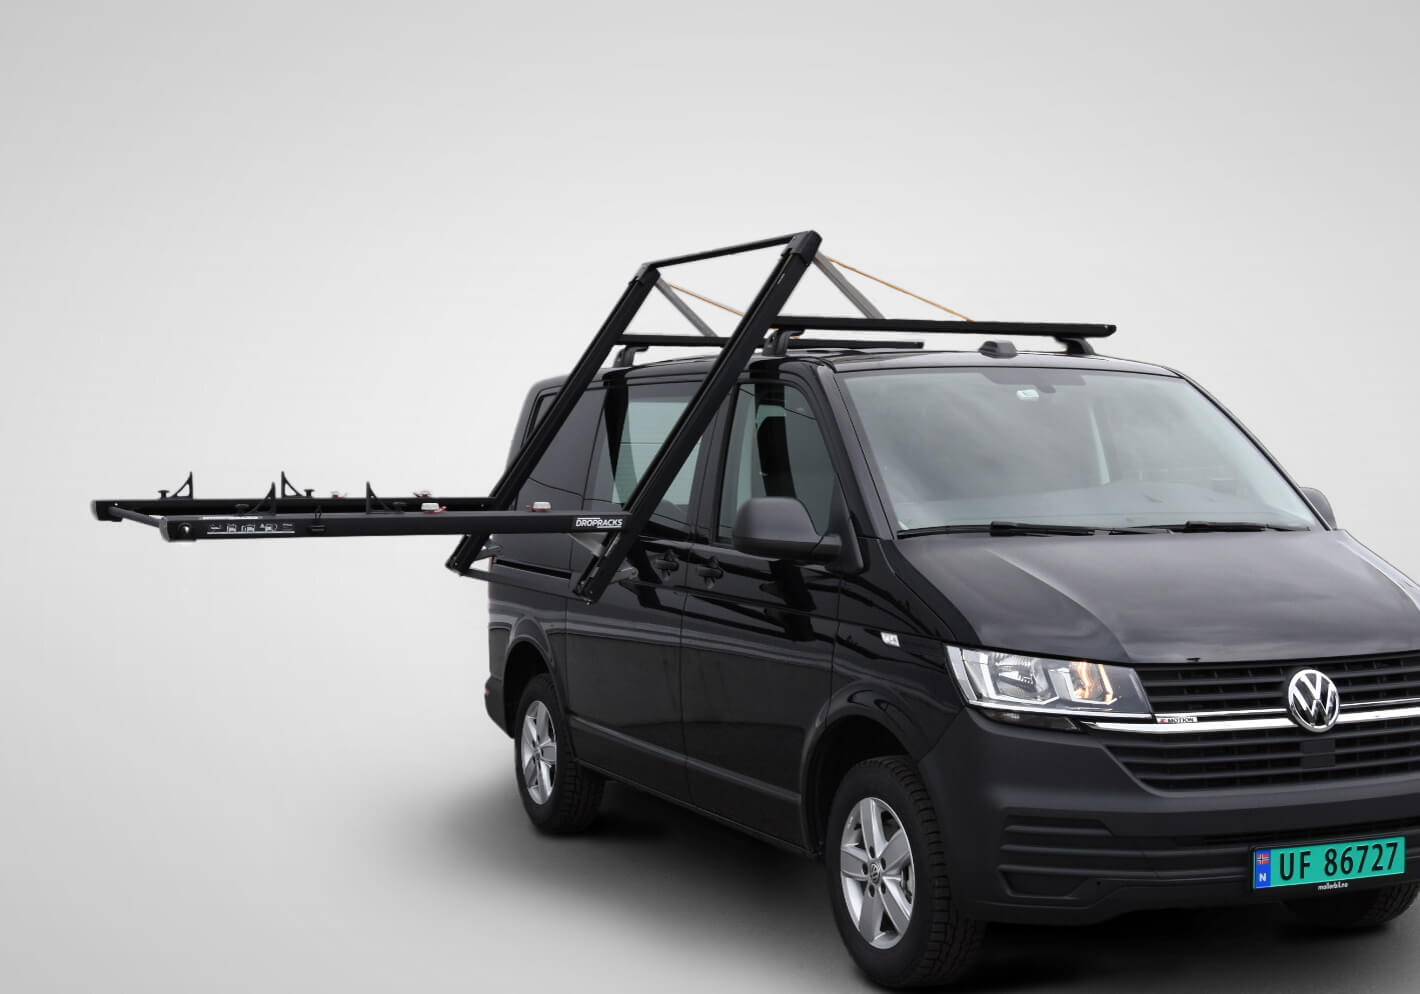 Volkswagen VW T6 Transporter L1 (SWB) H1 (low roof) (2015 onwards):Dropracks XL roof loading system (vehicle roof connectors at extra cost)